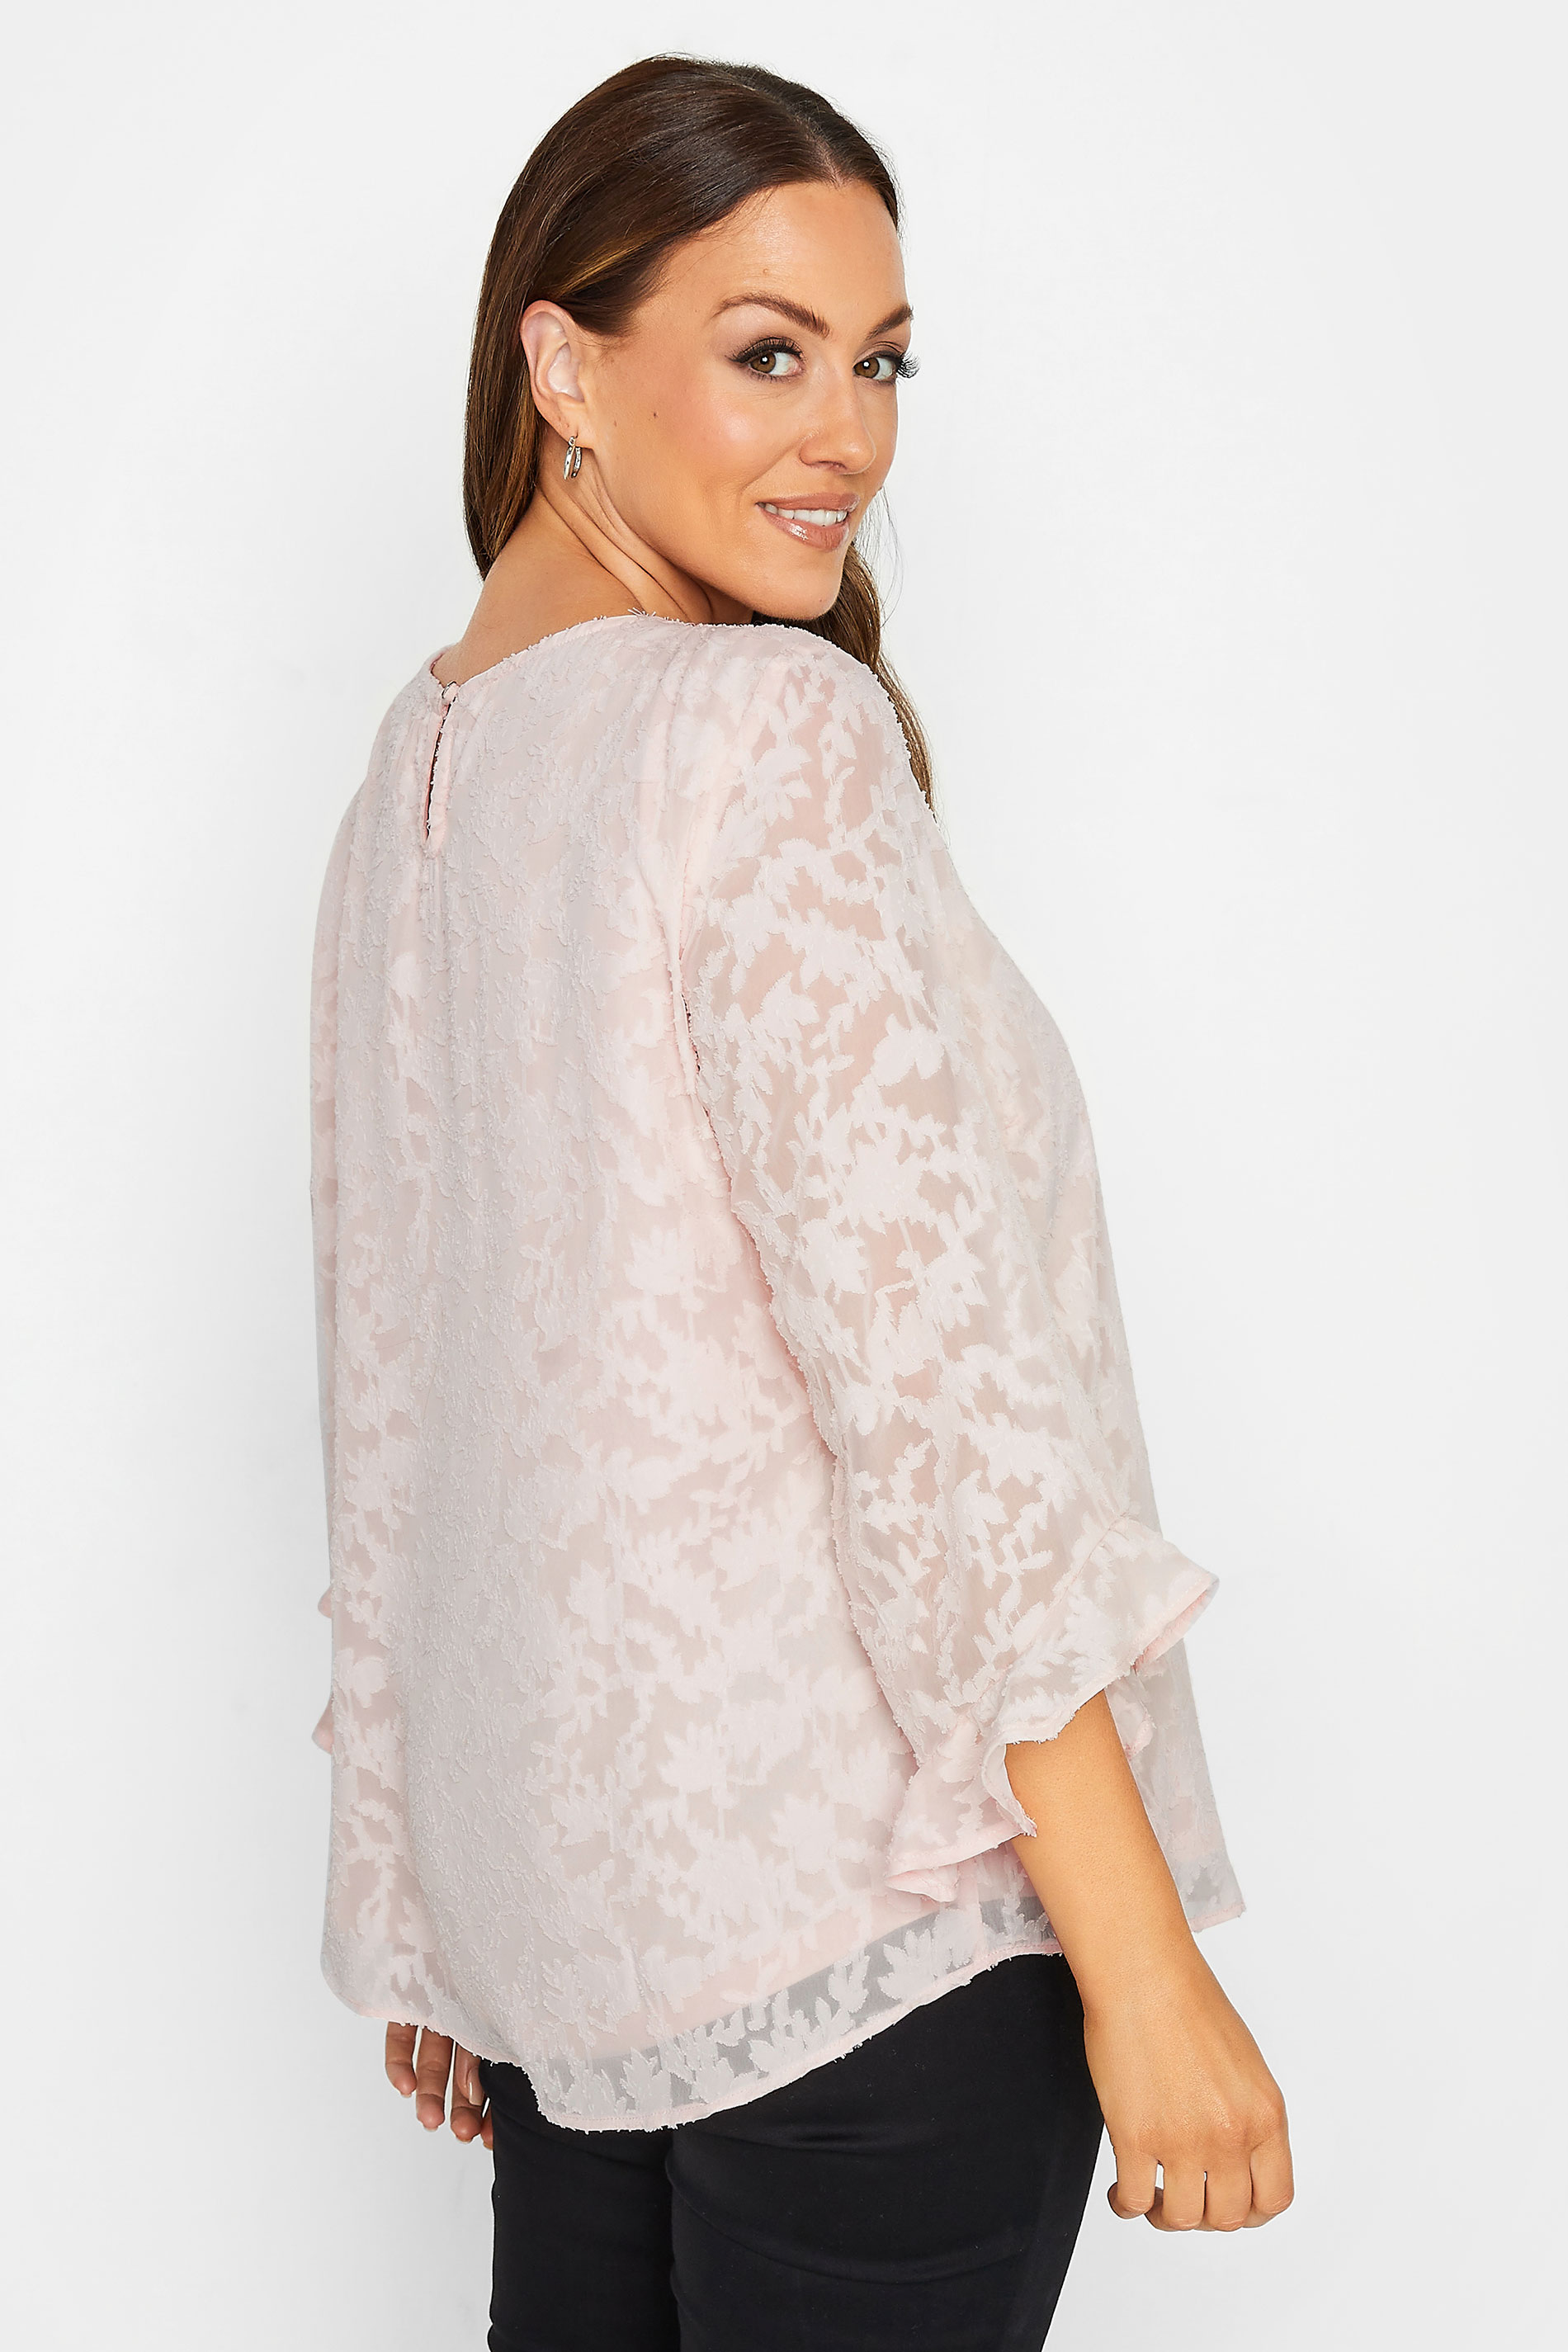 M&Co Pink Burnout Frill Sleeve Top | M&Co 3